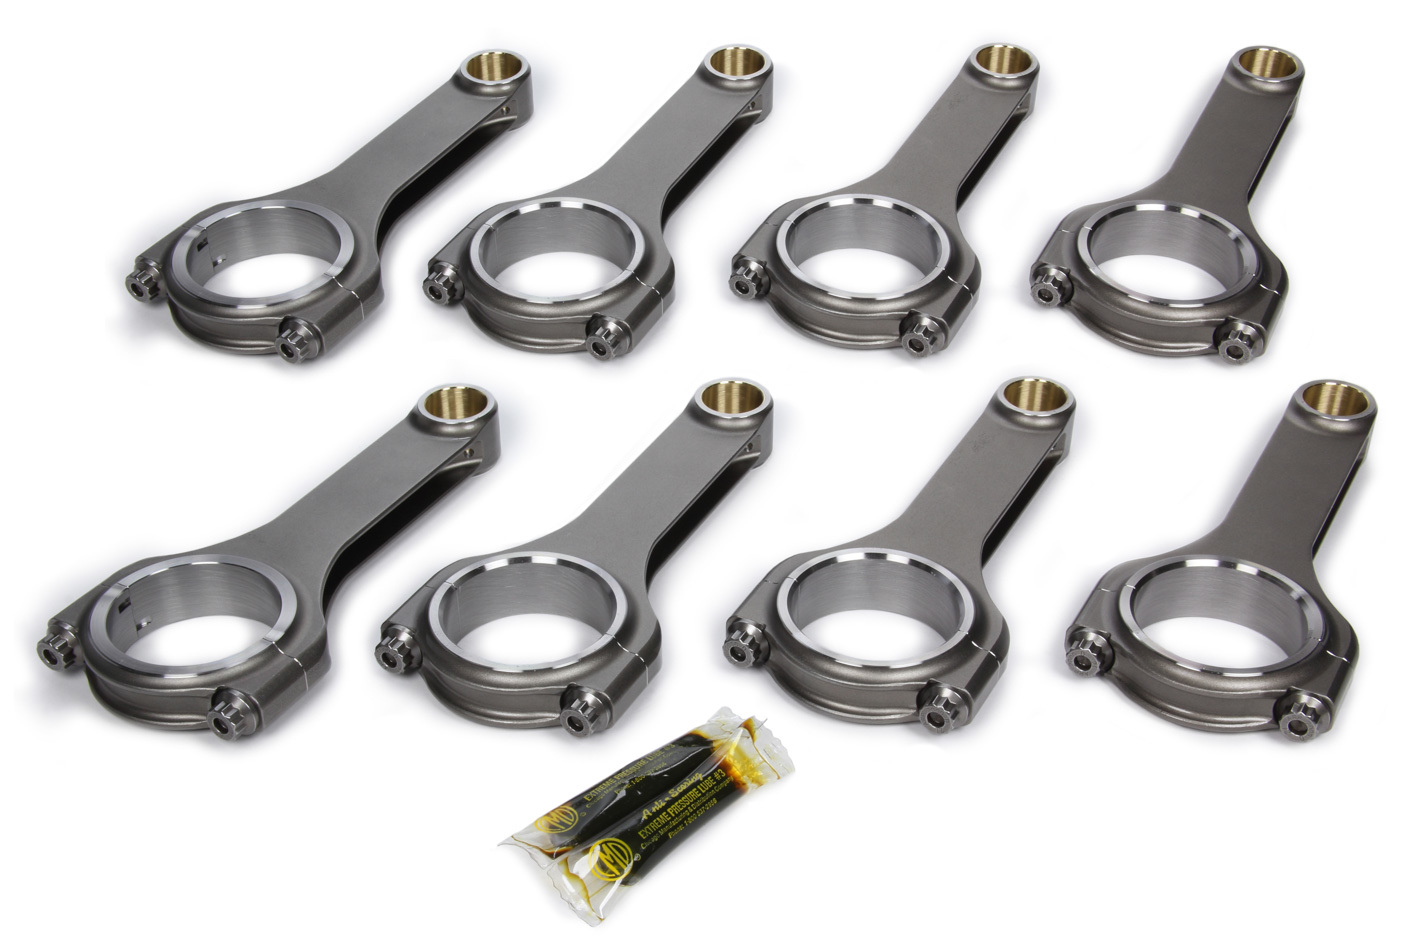 Dyers Rods 6000NHSBCLJ7200AD - Connecting Rod, H Beam, 6.000 in Long, Bushed, 7/16 in Cap Screws, ARP2000, Small Block Chevy, Set of 8